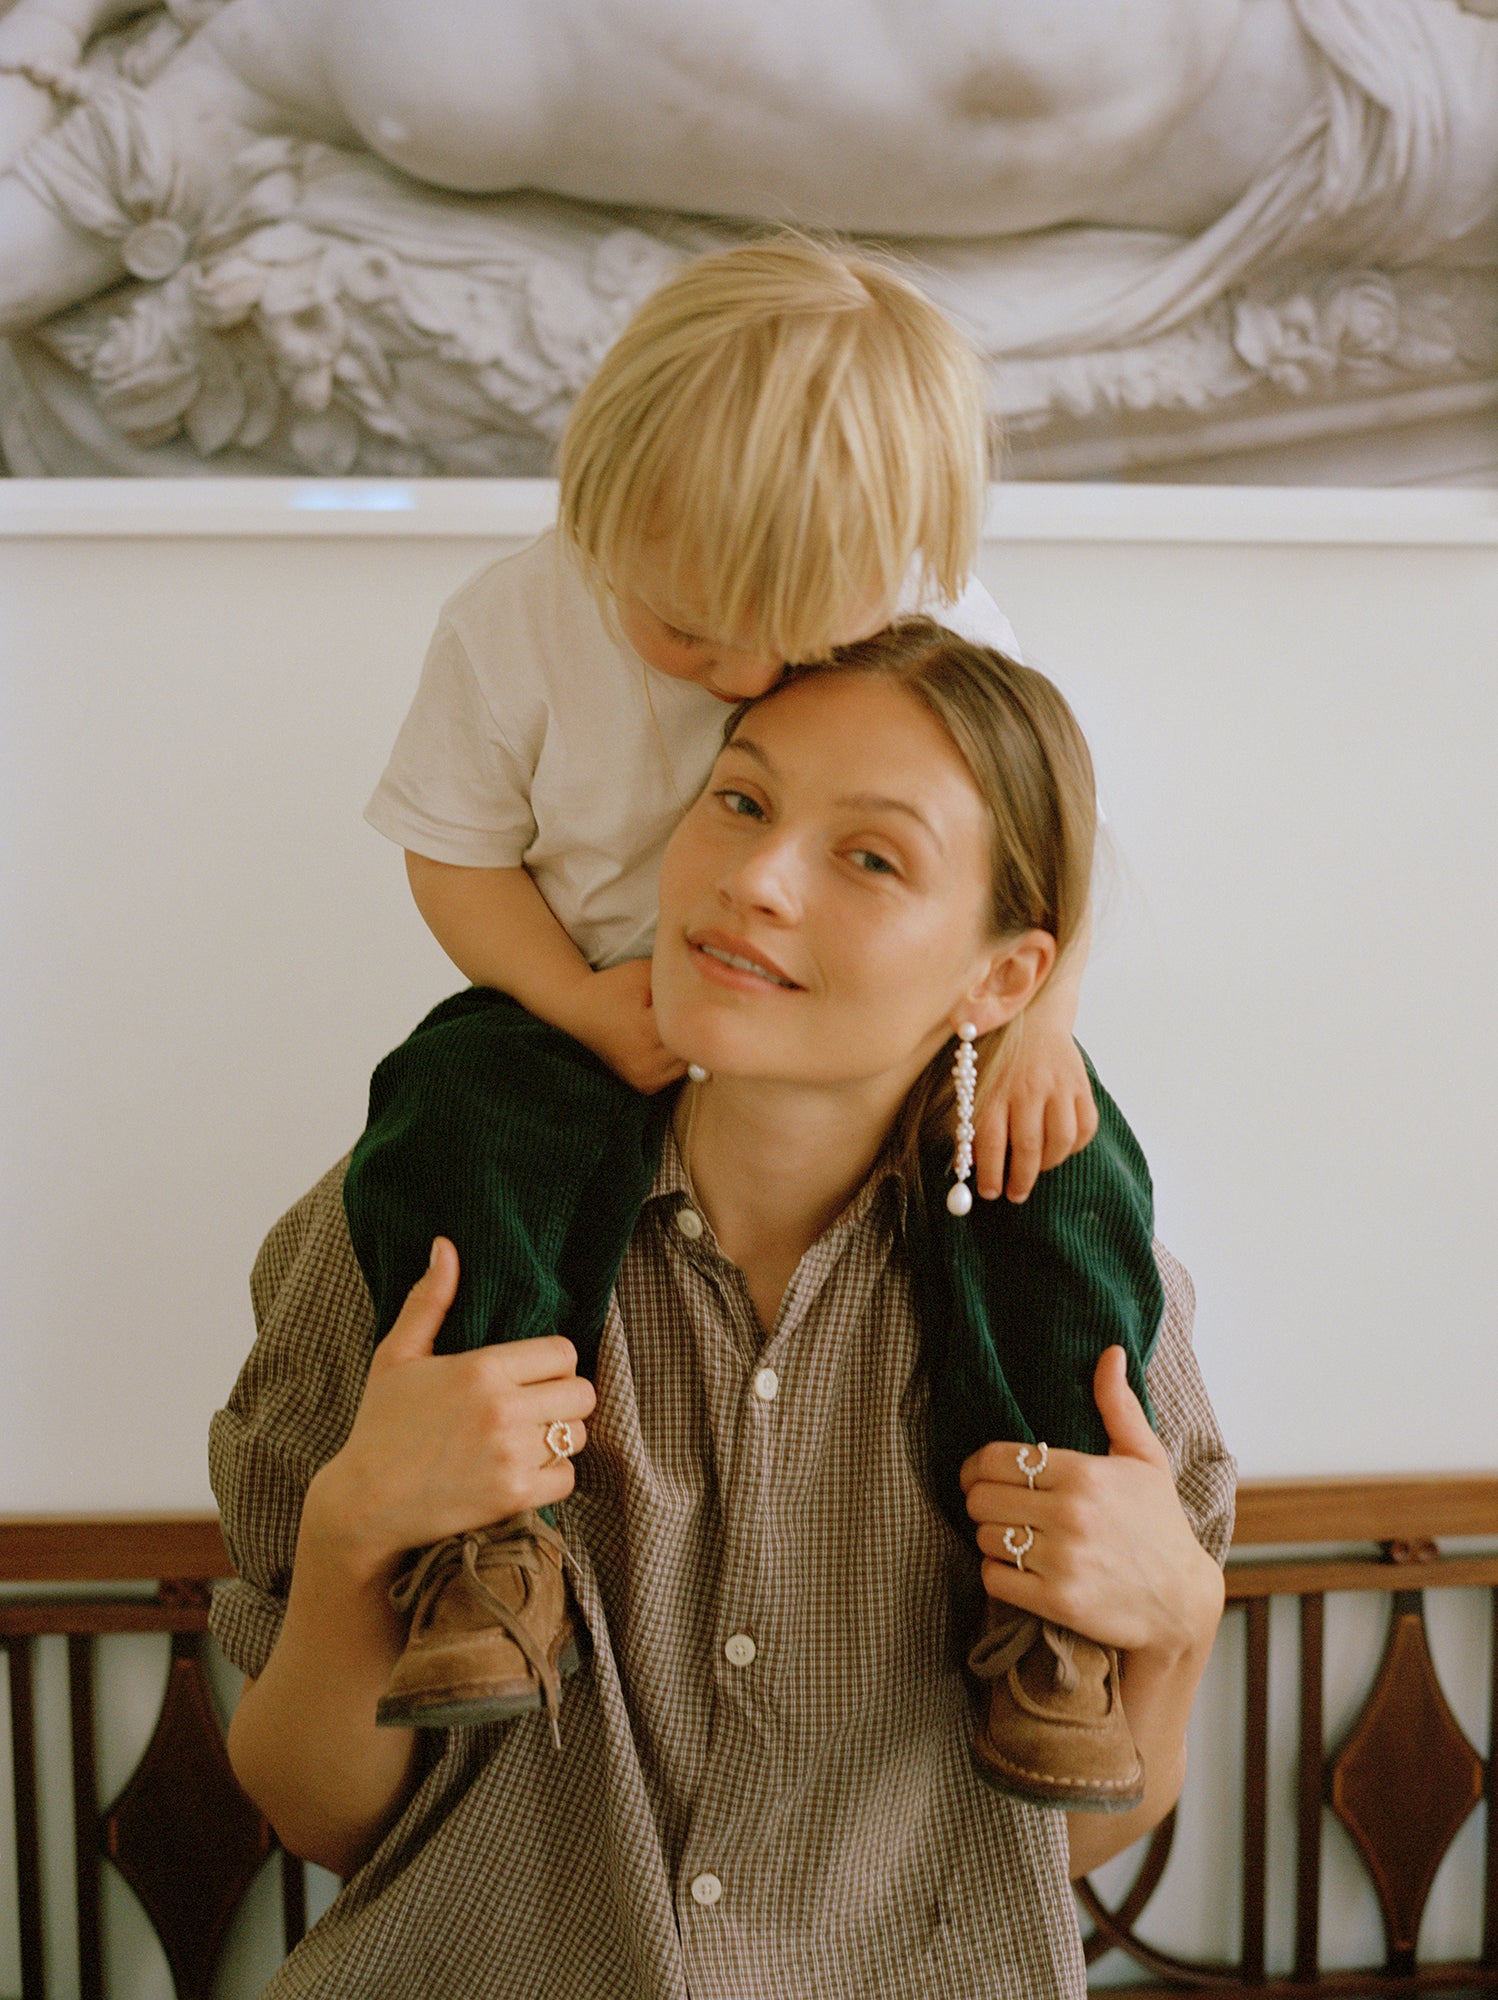 Caroline Corinth with her son, Carl. Caroline is wearing the Grand Bellis long pearl earrings, Ensemble C diamond letter ring and Ensemble Coeur diamond heart ring. Carl is wearing the Simple C diamond letter necklace.